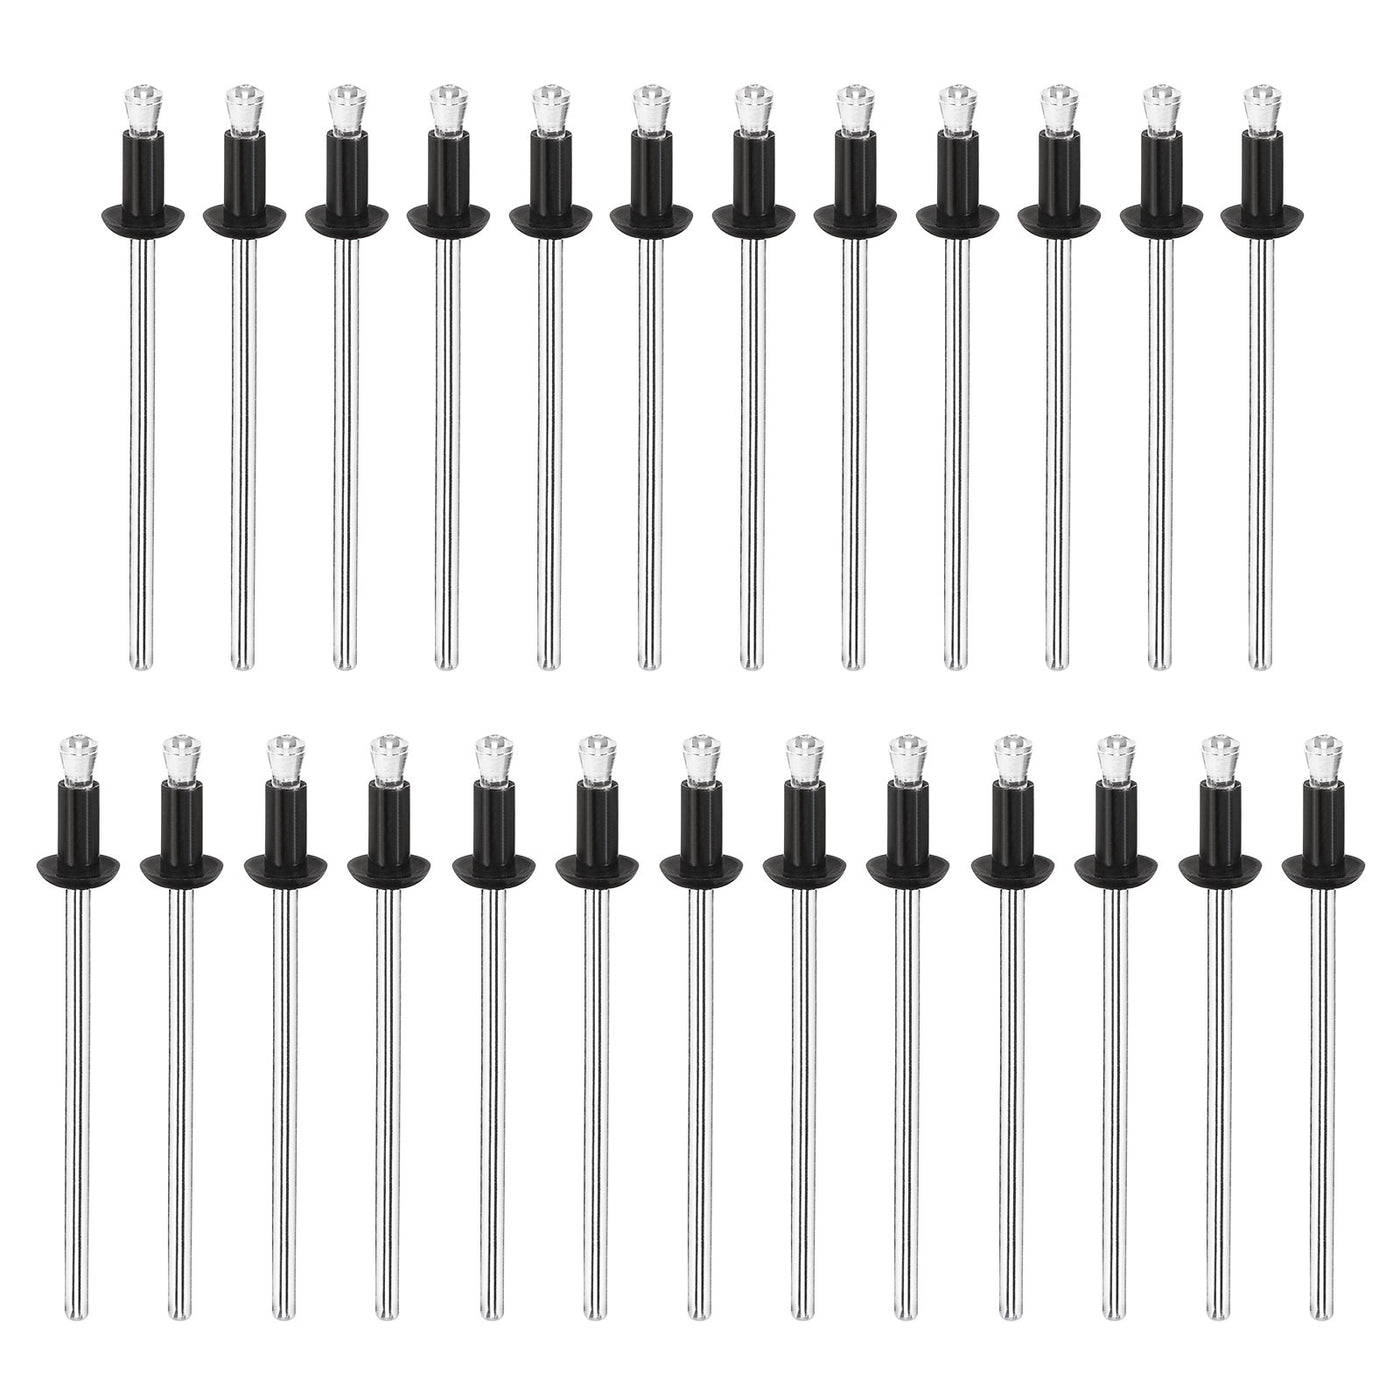 uxcell Uxcell 3.2mm x 6.4mm Nylon Blind Rivets for PC Board Bumper Trim Retainer, Black 50Pcs